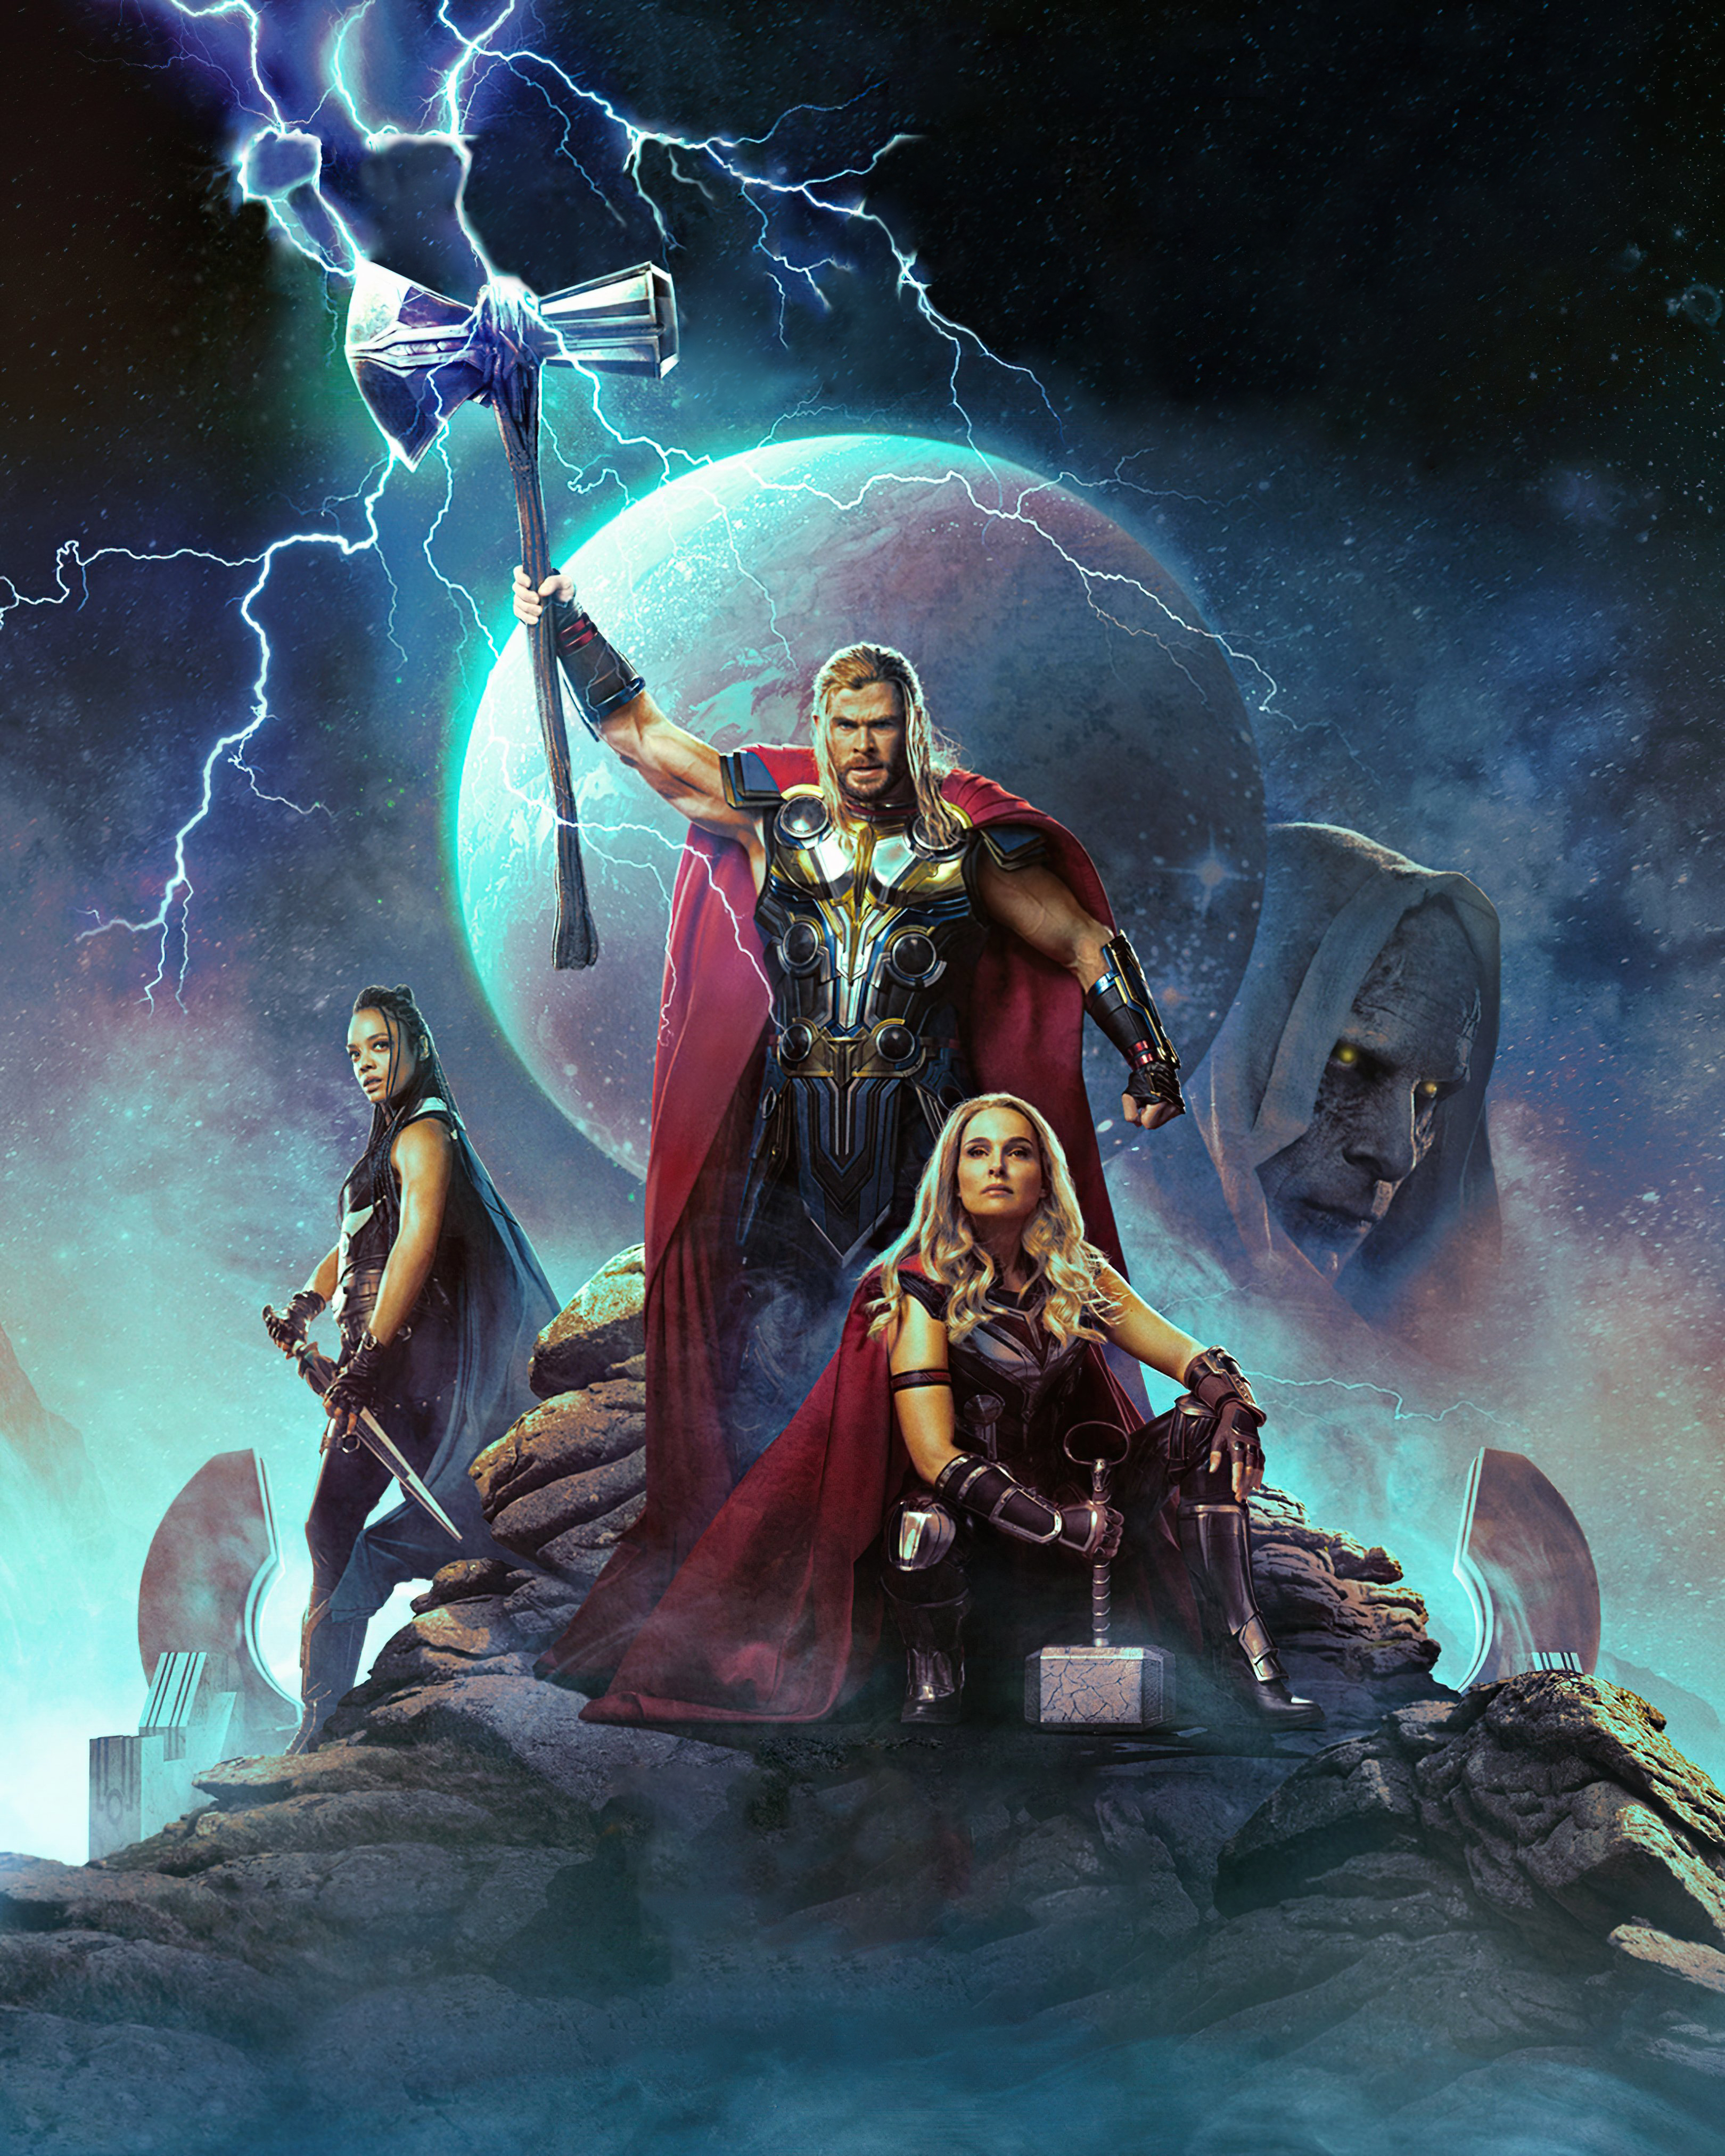 1920x10802021290 4K Thor Love and Thunder IMAX Poster 1920x10802021290  Resolution Wallpaper, HD Movies 4K Wallpapers, Images, Photos and  Background - Wallpapers Den